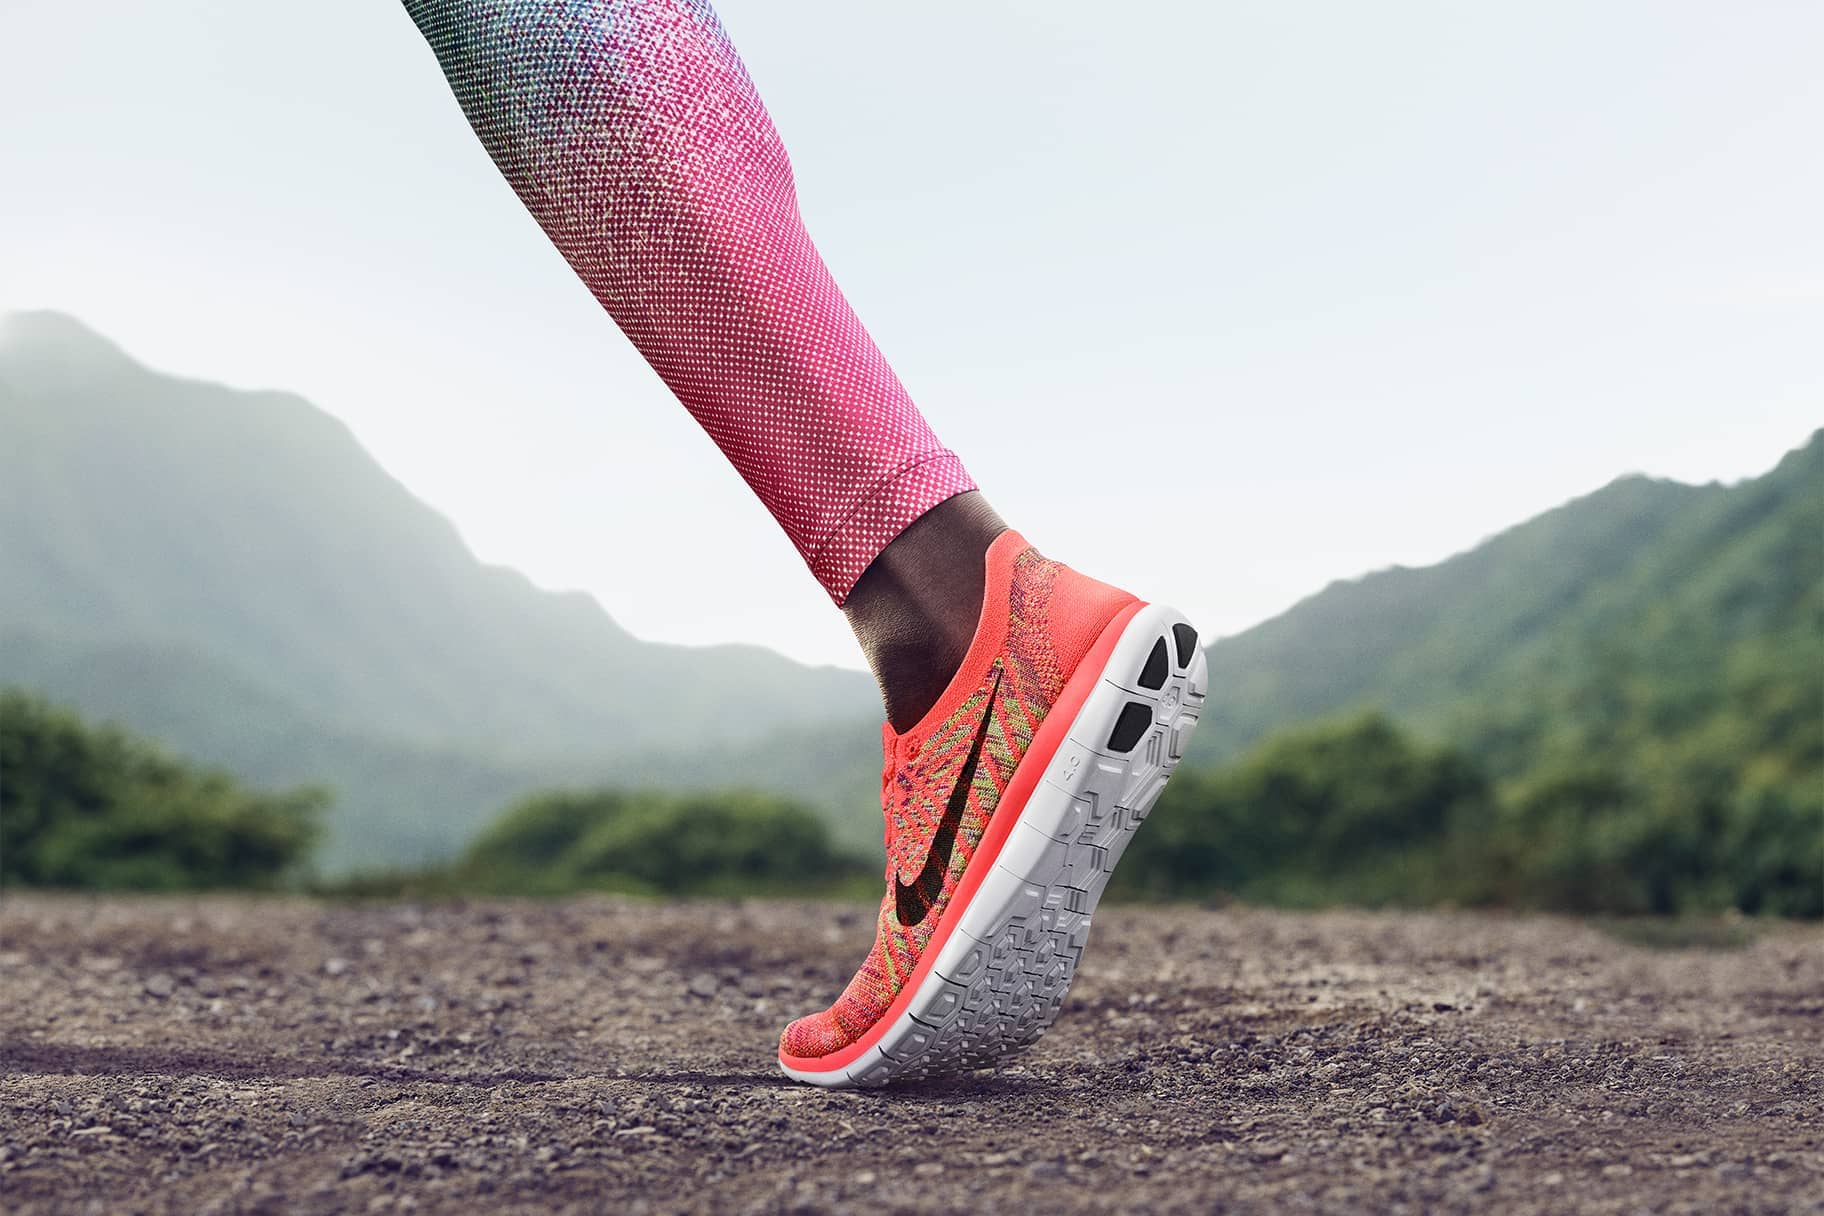 Tips for Buying Minimalist Barefoot Running Shoes. Nike CH